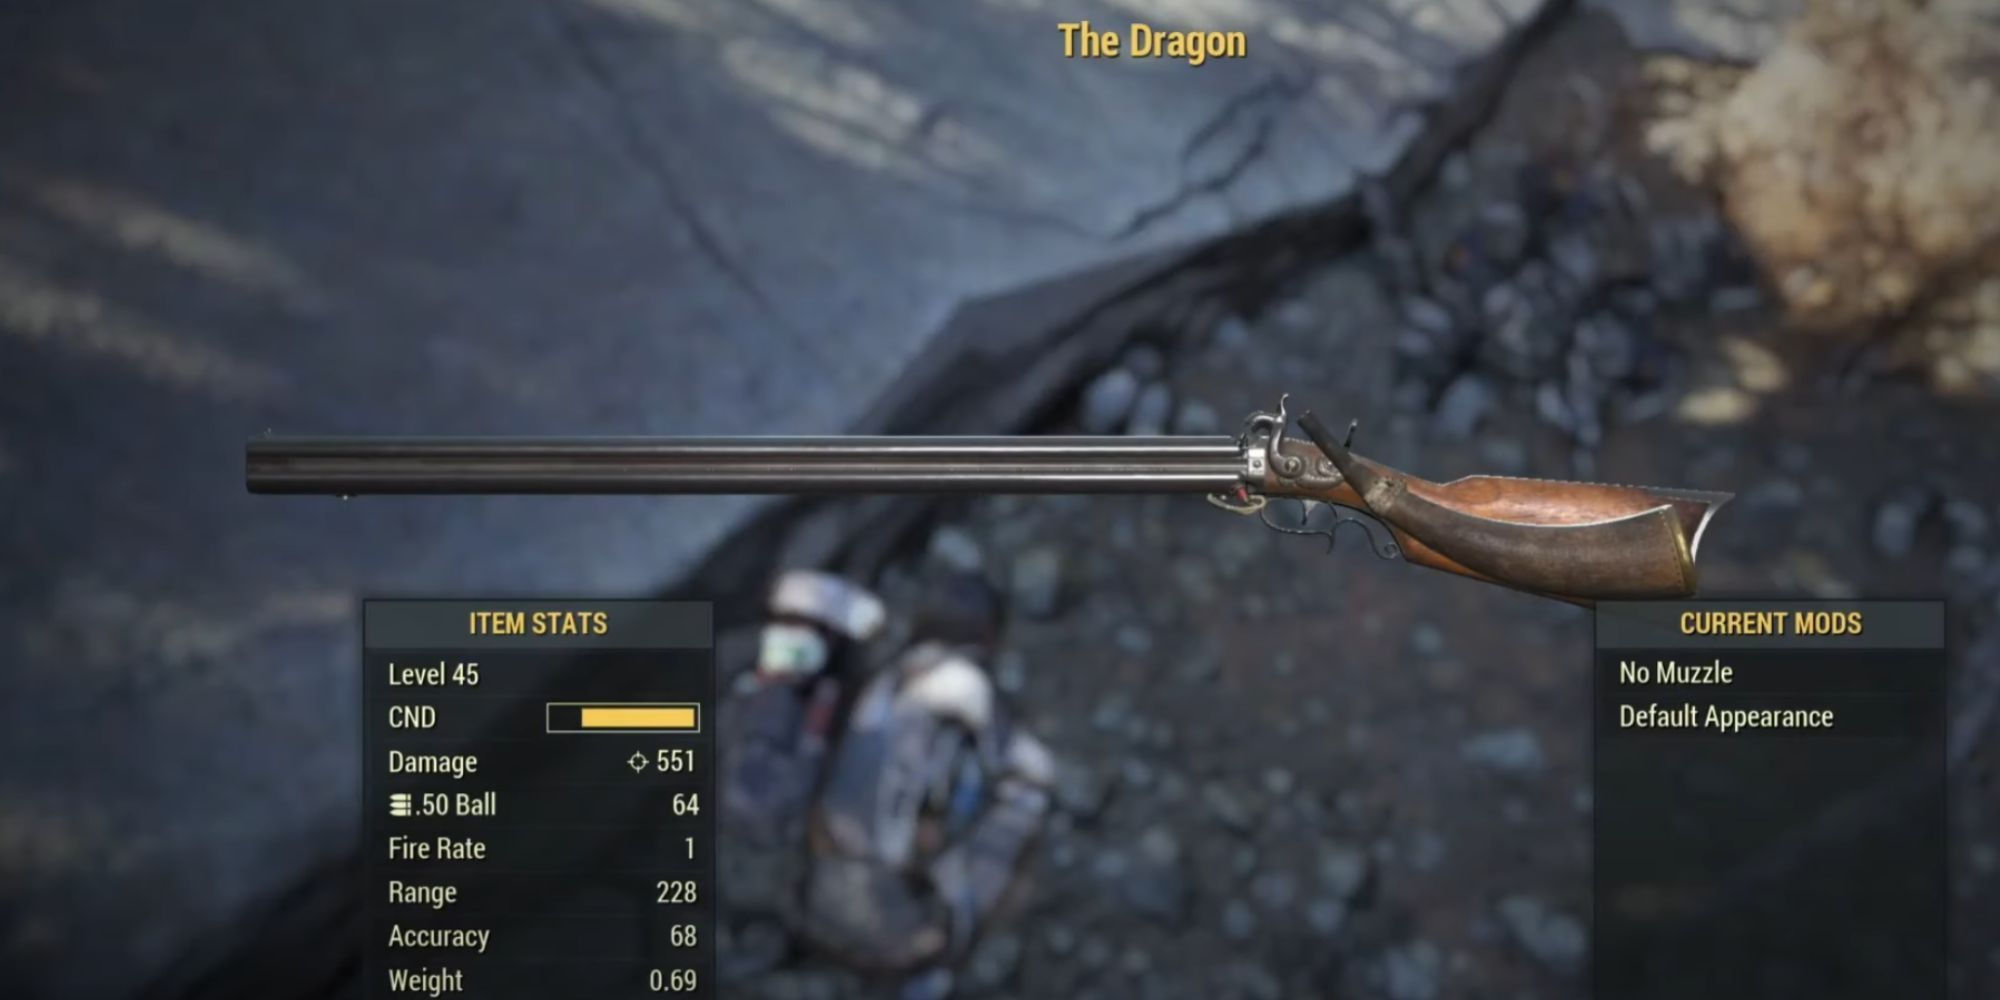 The Dragon's weapon stats and mods page.